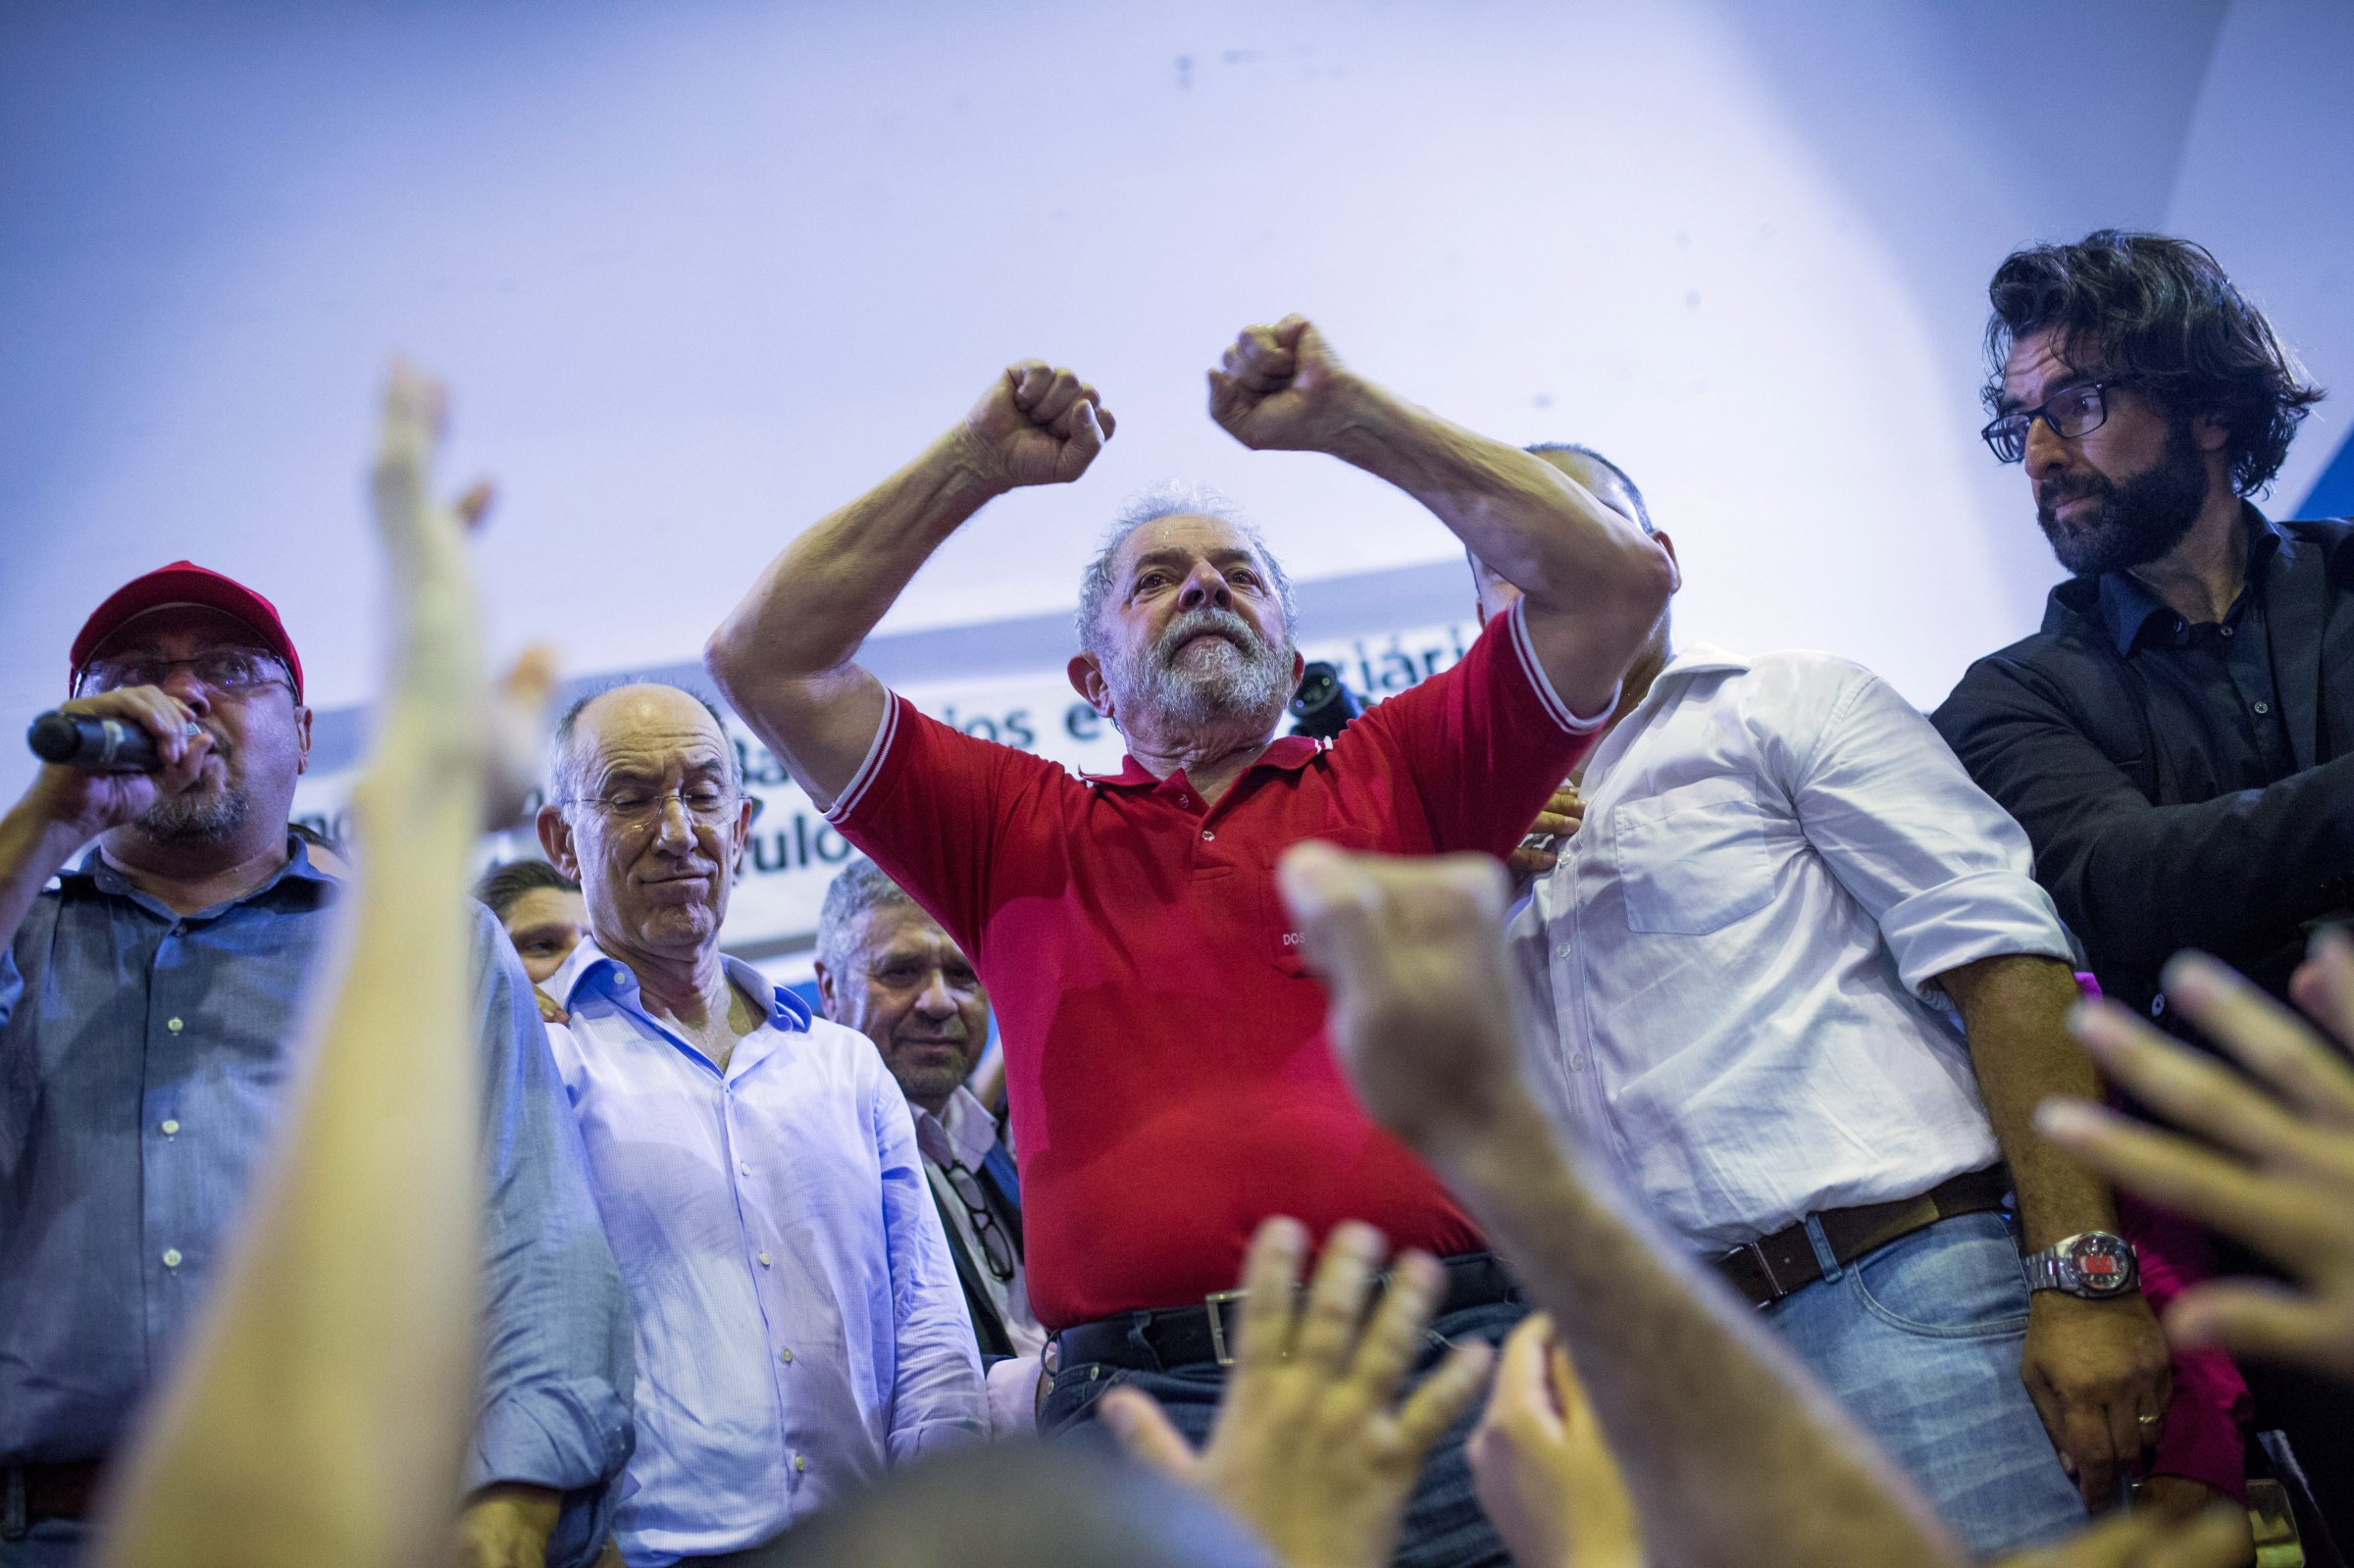 SAO PAULO, BRAZIL - MARCH 4:  Former President of Brazil, Luiz Inacio Lula da Silva, during a during rally for hundreds of people at the Partido dos Trabalhadores headquarters on March 4, 2016, in Sao Paulo, Brazil. Lula is accused of corruption and embezzlement in the Federal Police investigation involving fraud at Petrobras company. (Photo by Victor Moriyama/Getty Images)